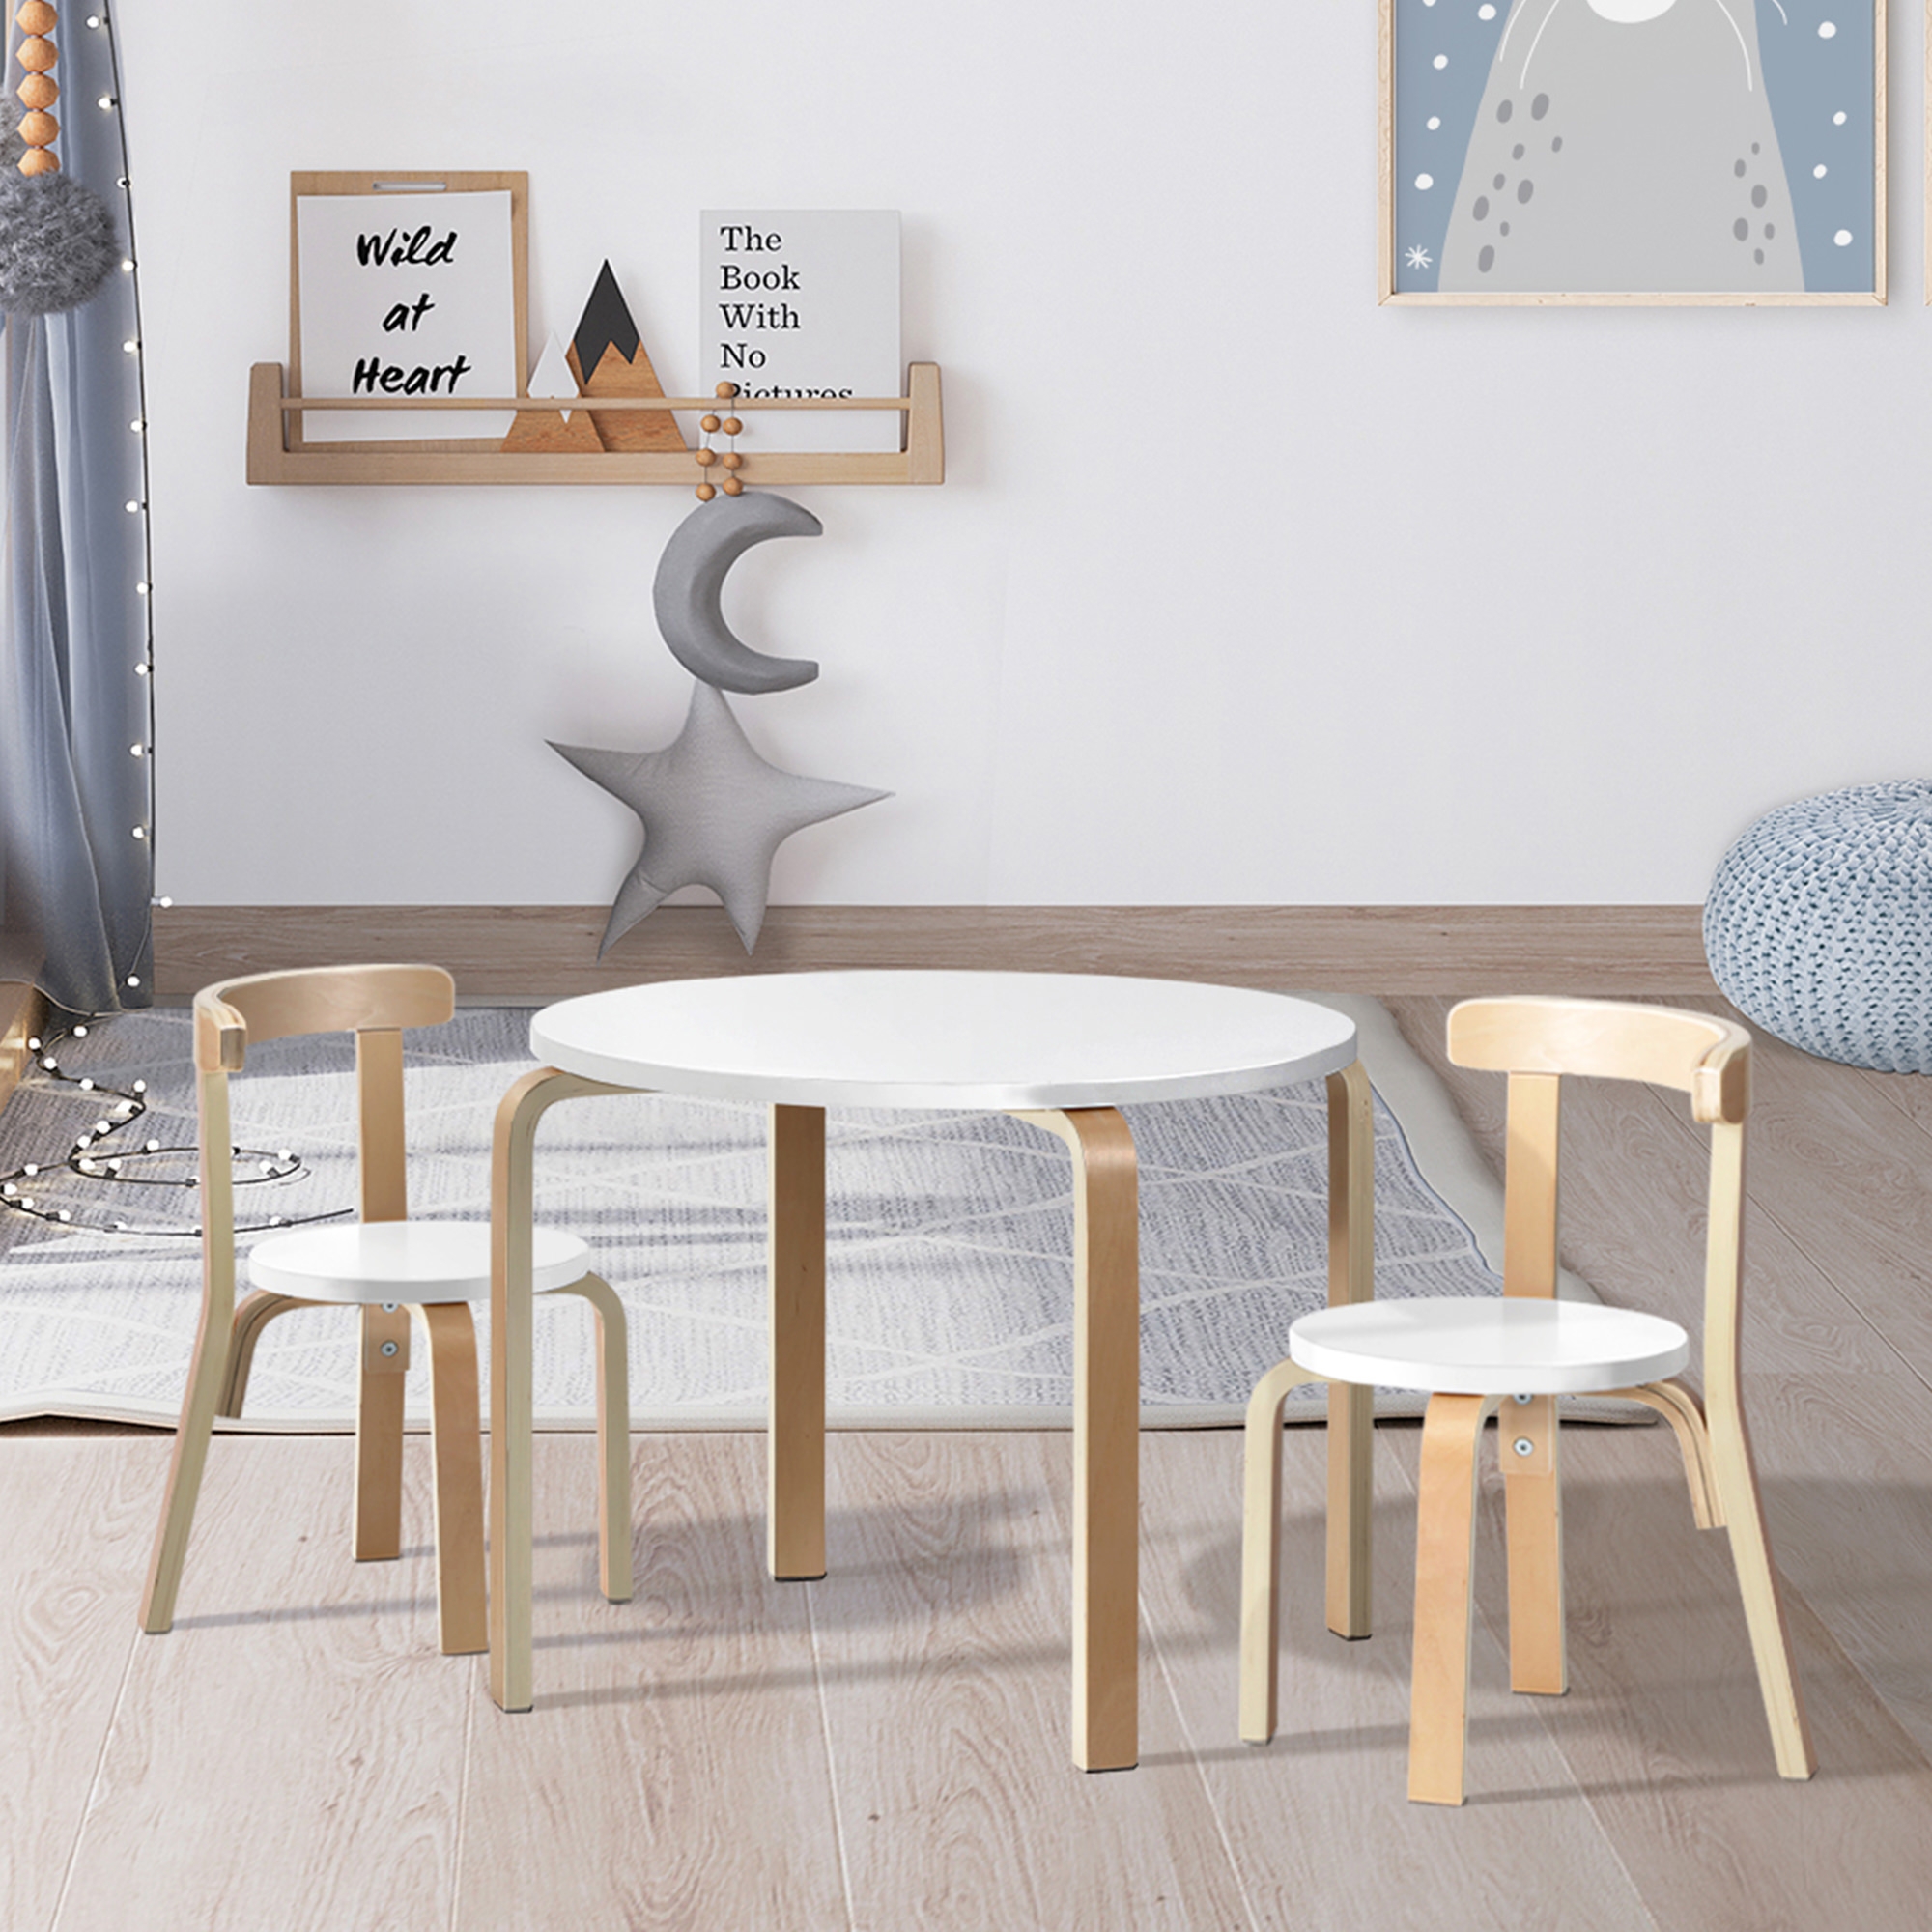 Keezi Nordic Kids Table and Chair 3pc Set Image 2